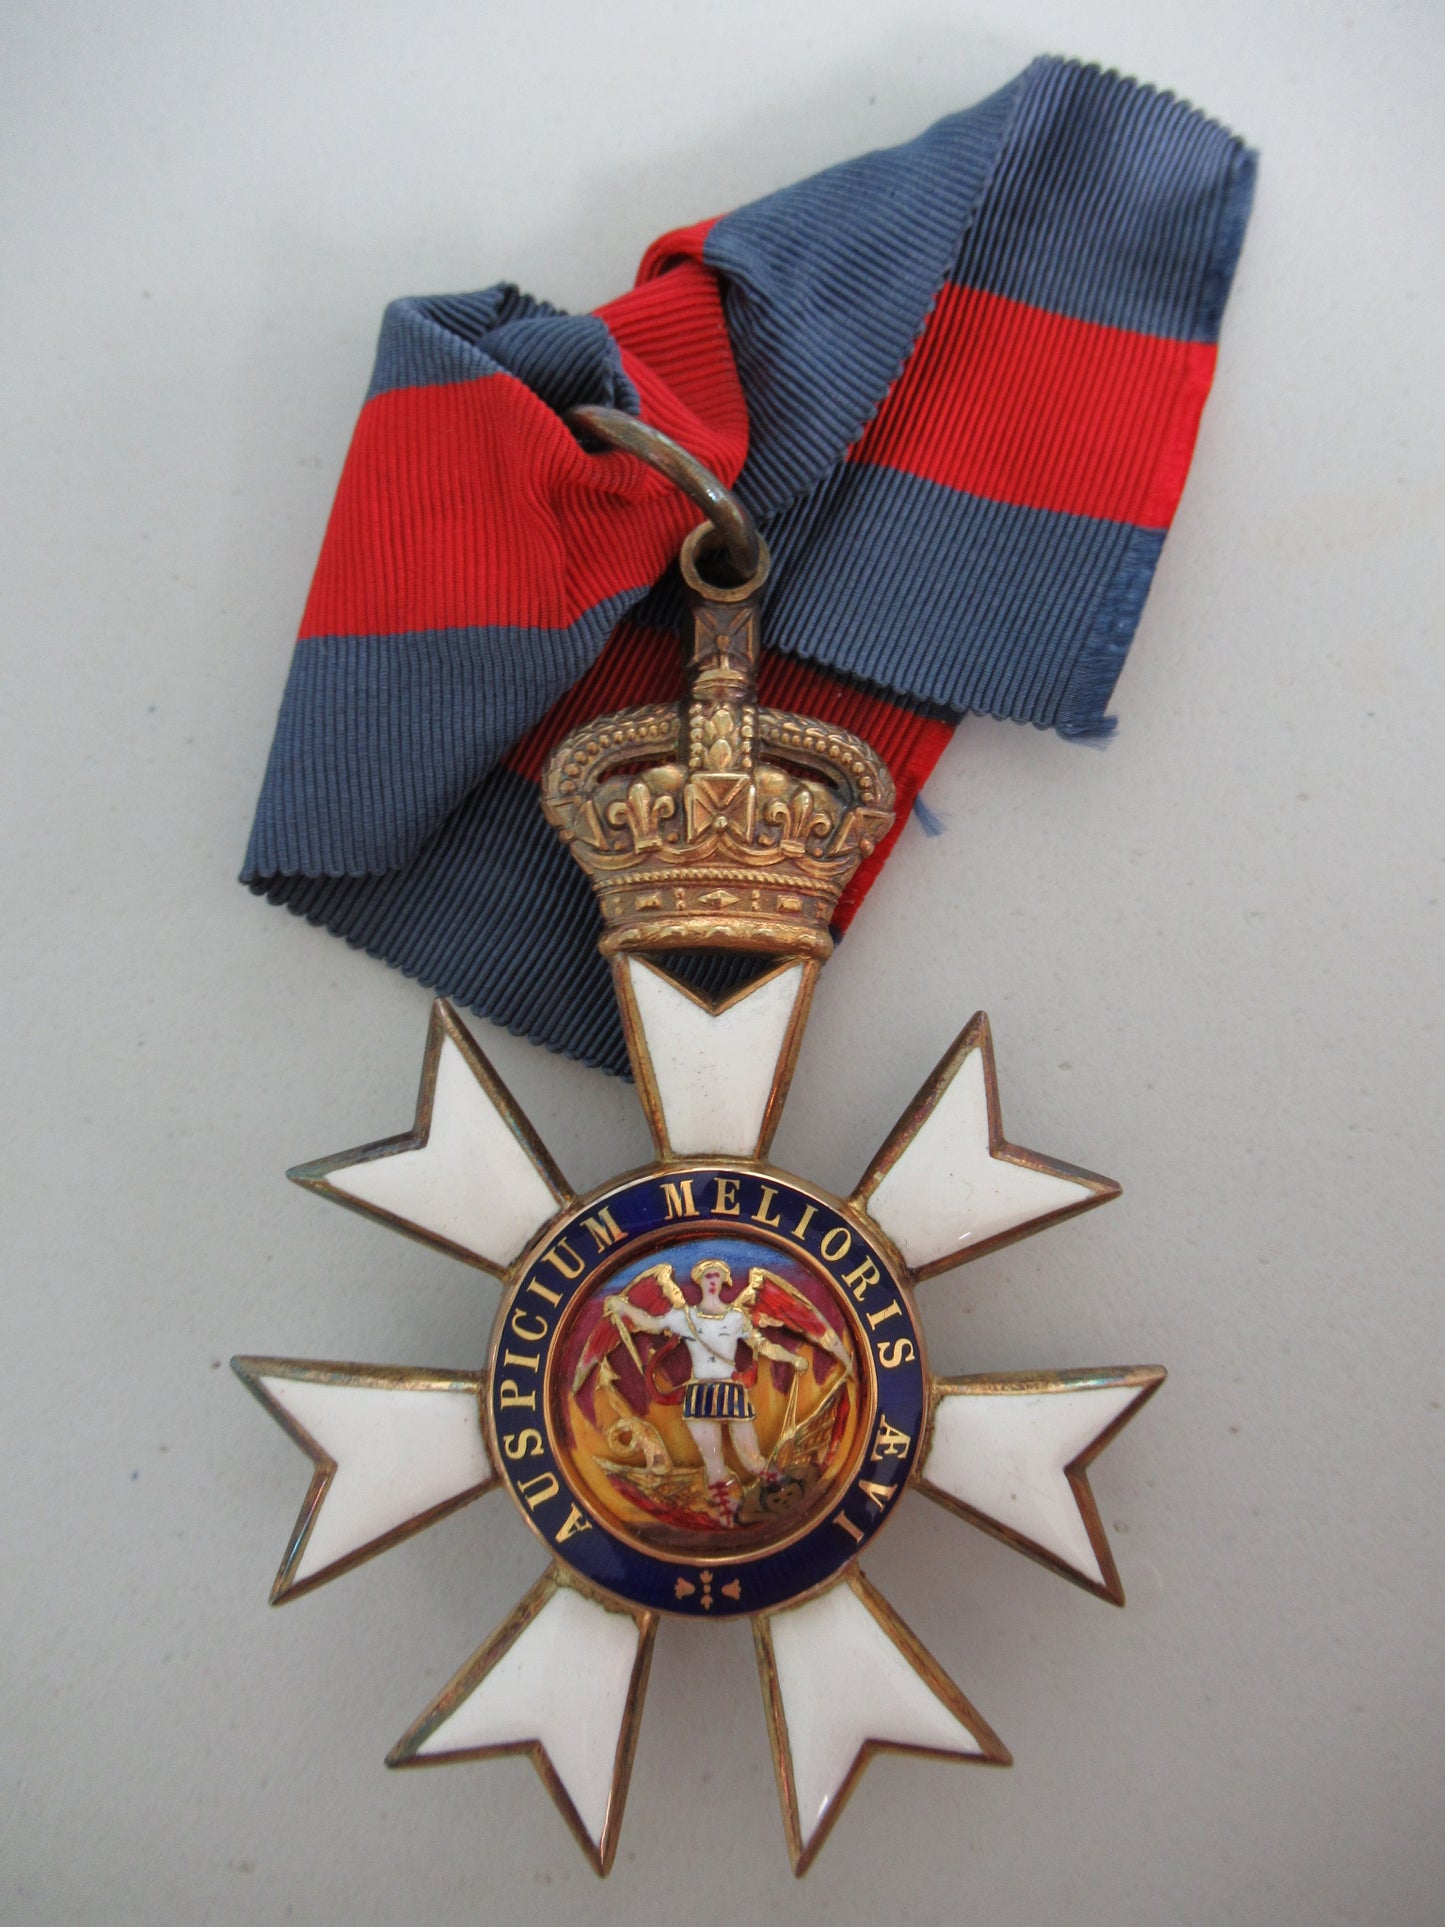 GREAT BRITAIN ORDER OF ST. MICHAEL & ST. GEORGE K.C.M.G. NECK BADGE AND BREAST STAR IN ORIGINAL GARRAD & COMPANY CASE. SILVER/GILT. RR!